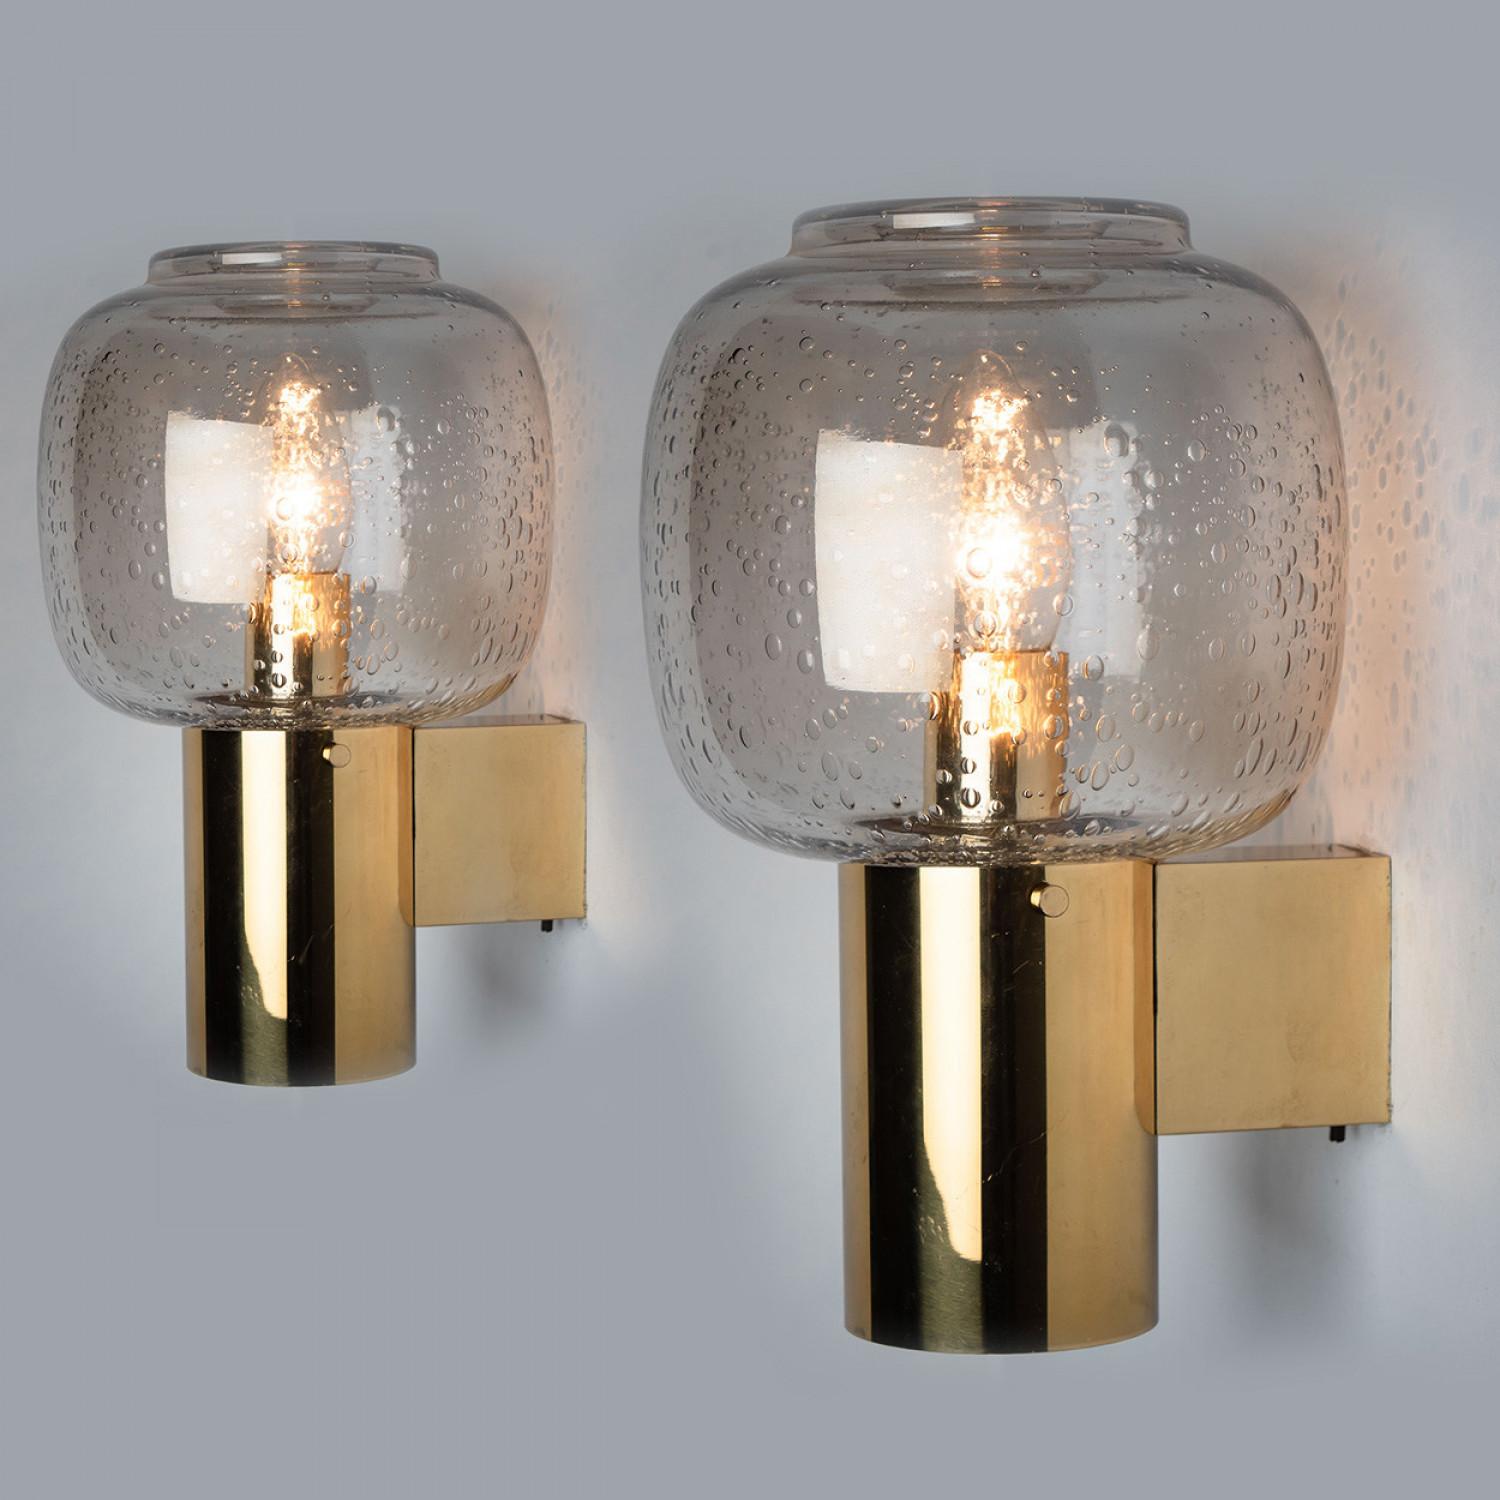 1 Of the 3 Brass and Glass Wall Lights in style of Hans Agne Jakobsson , circa 1 In Good Condition For Sale In Rijssen, NL